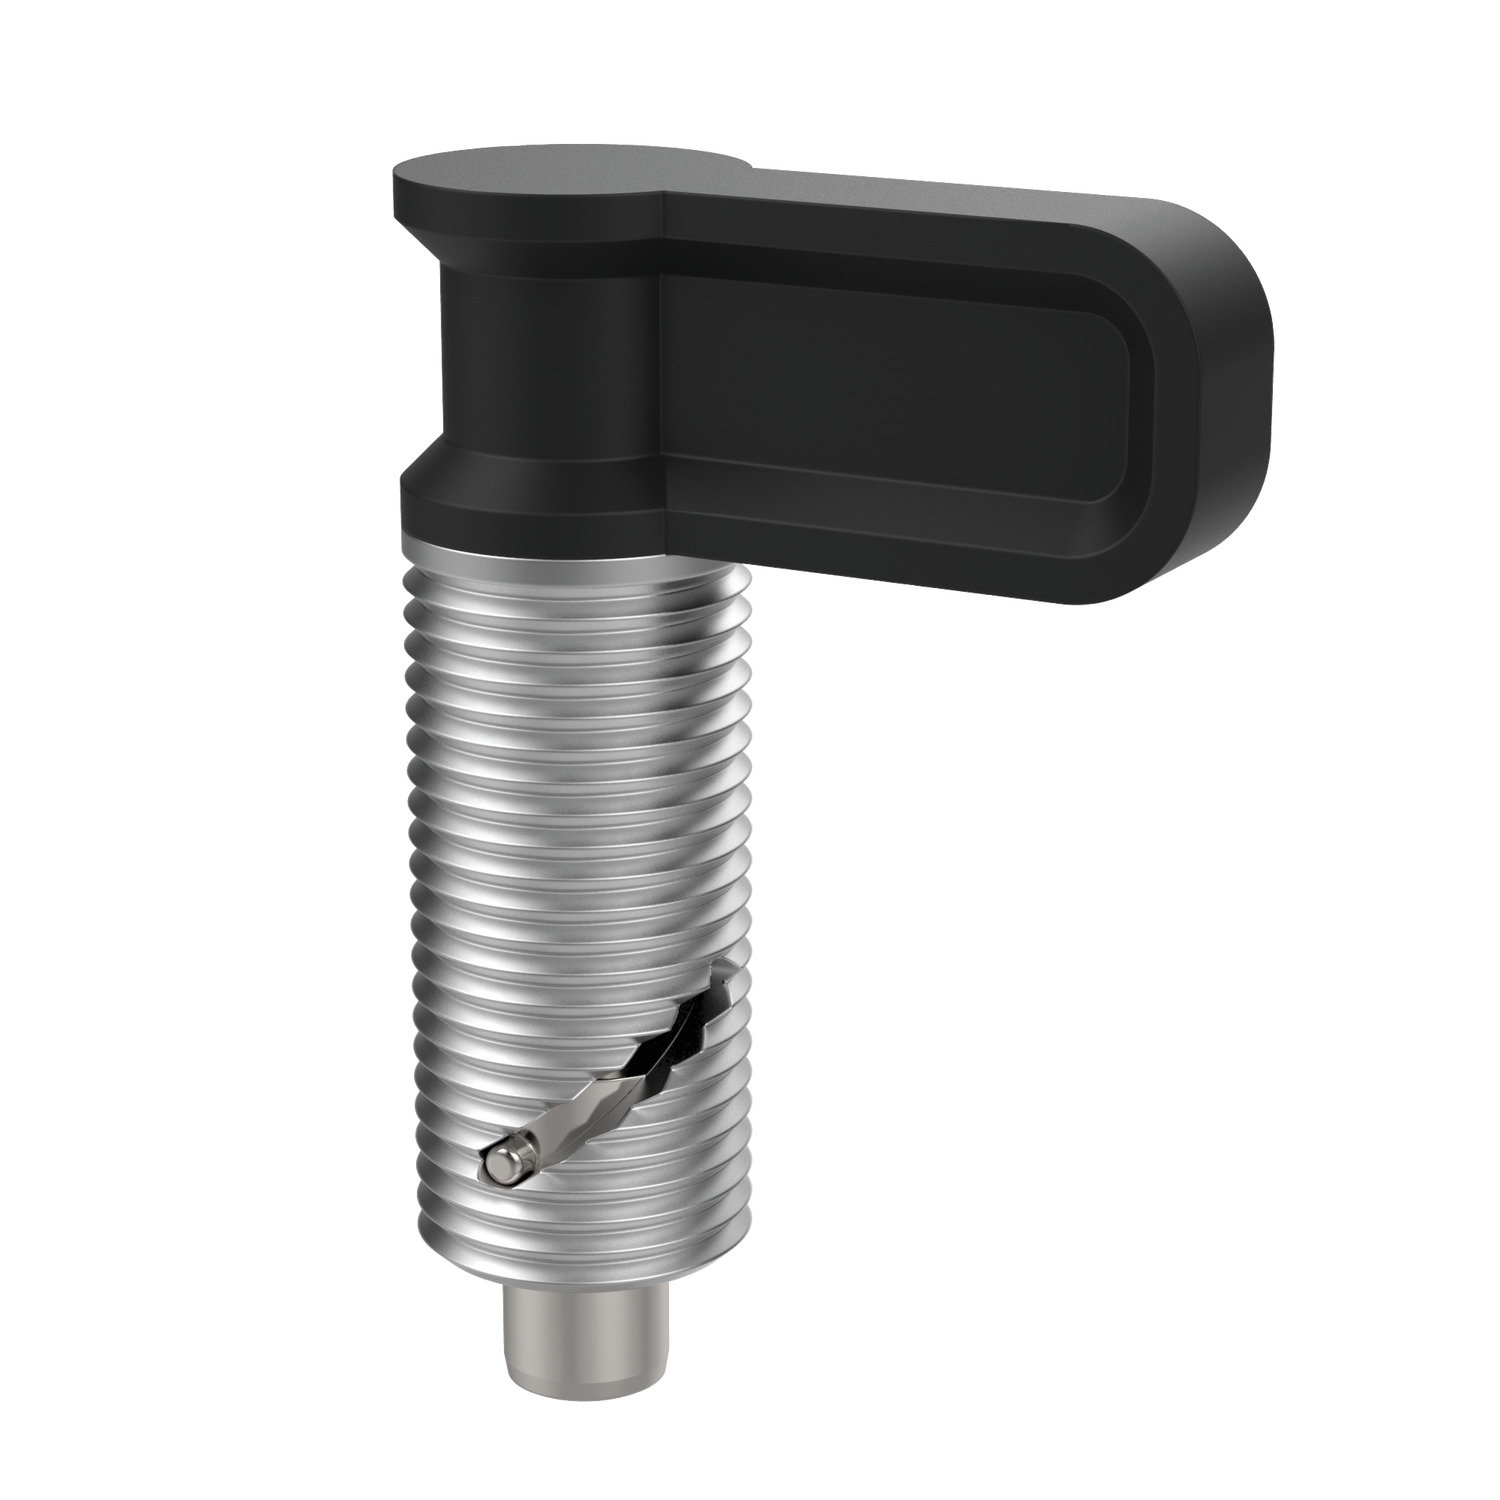 Index Plungers - Lever Grip Lever grip index plungers with 90° or 120° actuation. Three different types available: without rest position, with rest position and with a safety rest position.